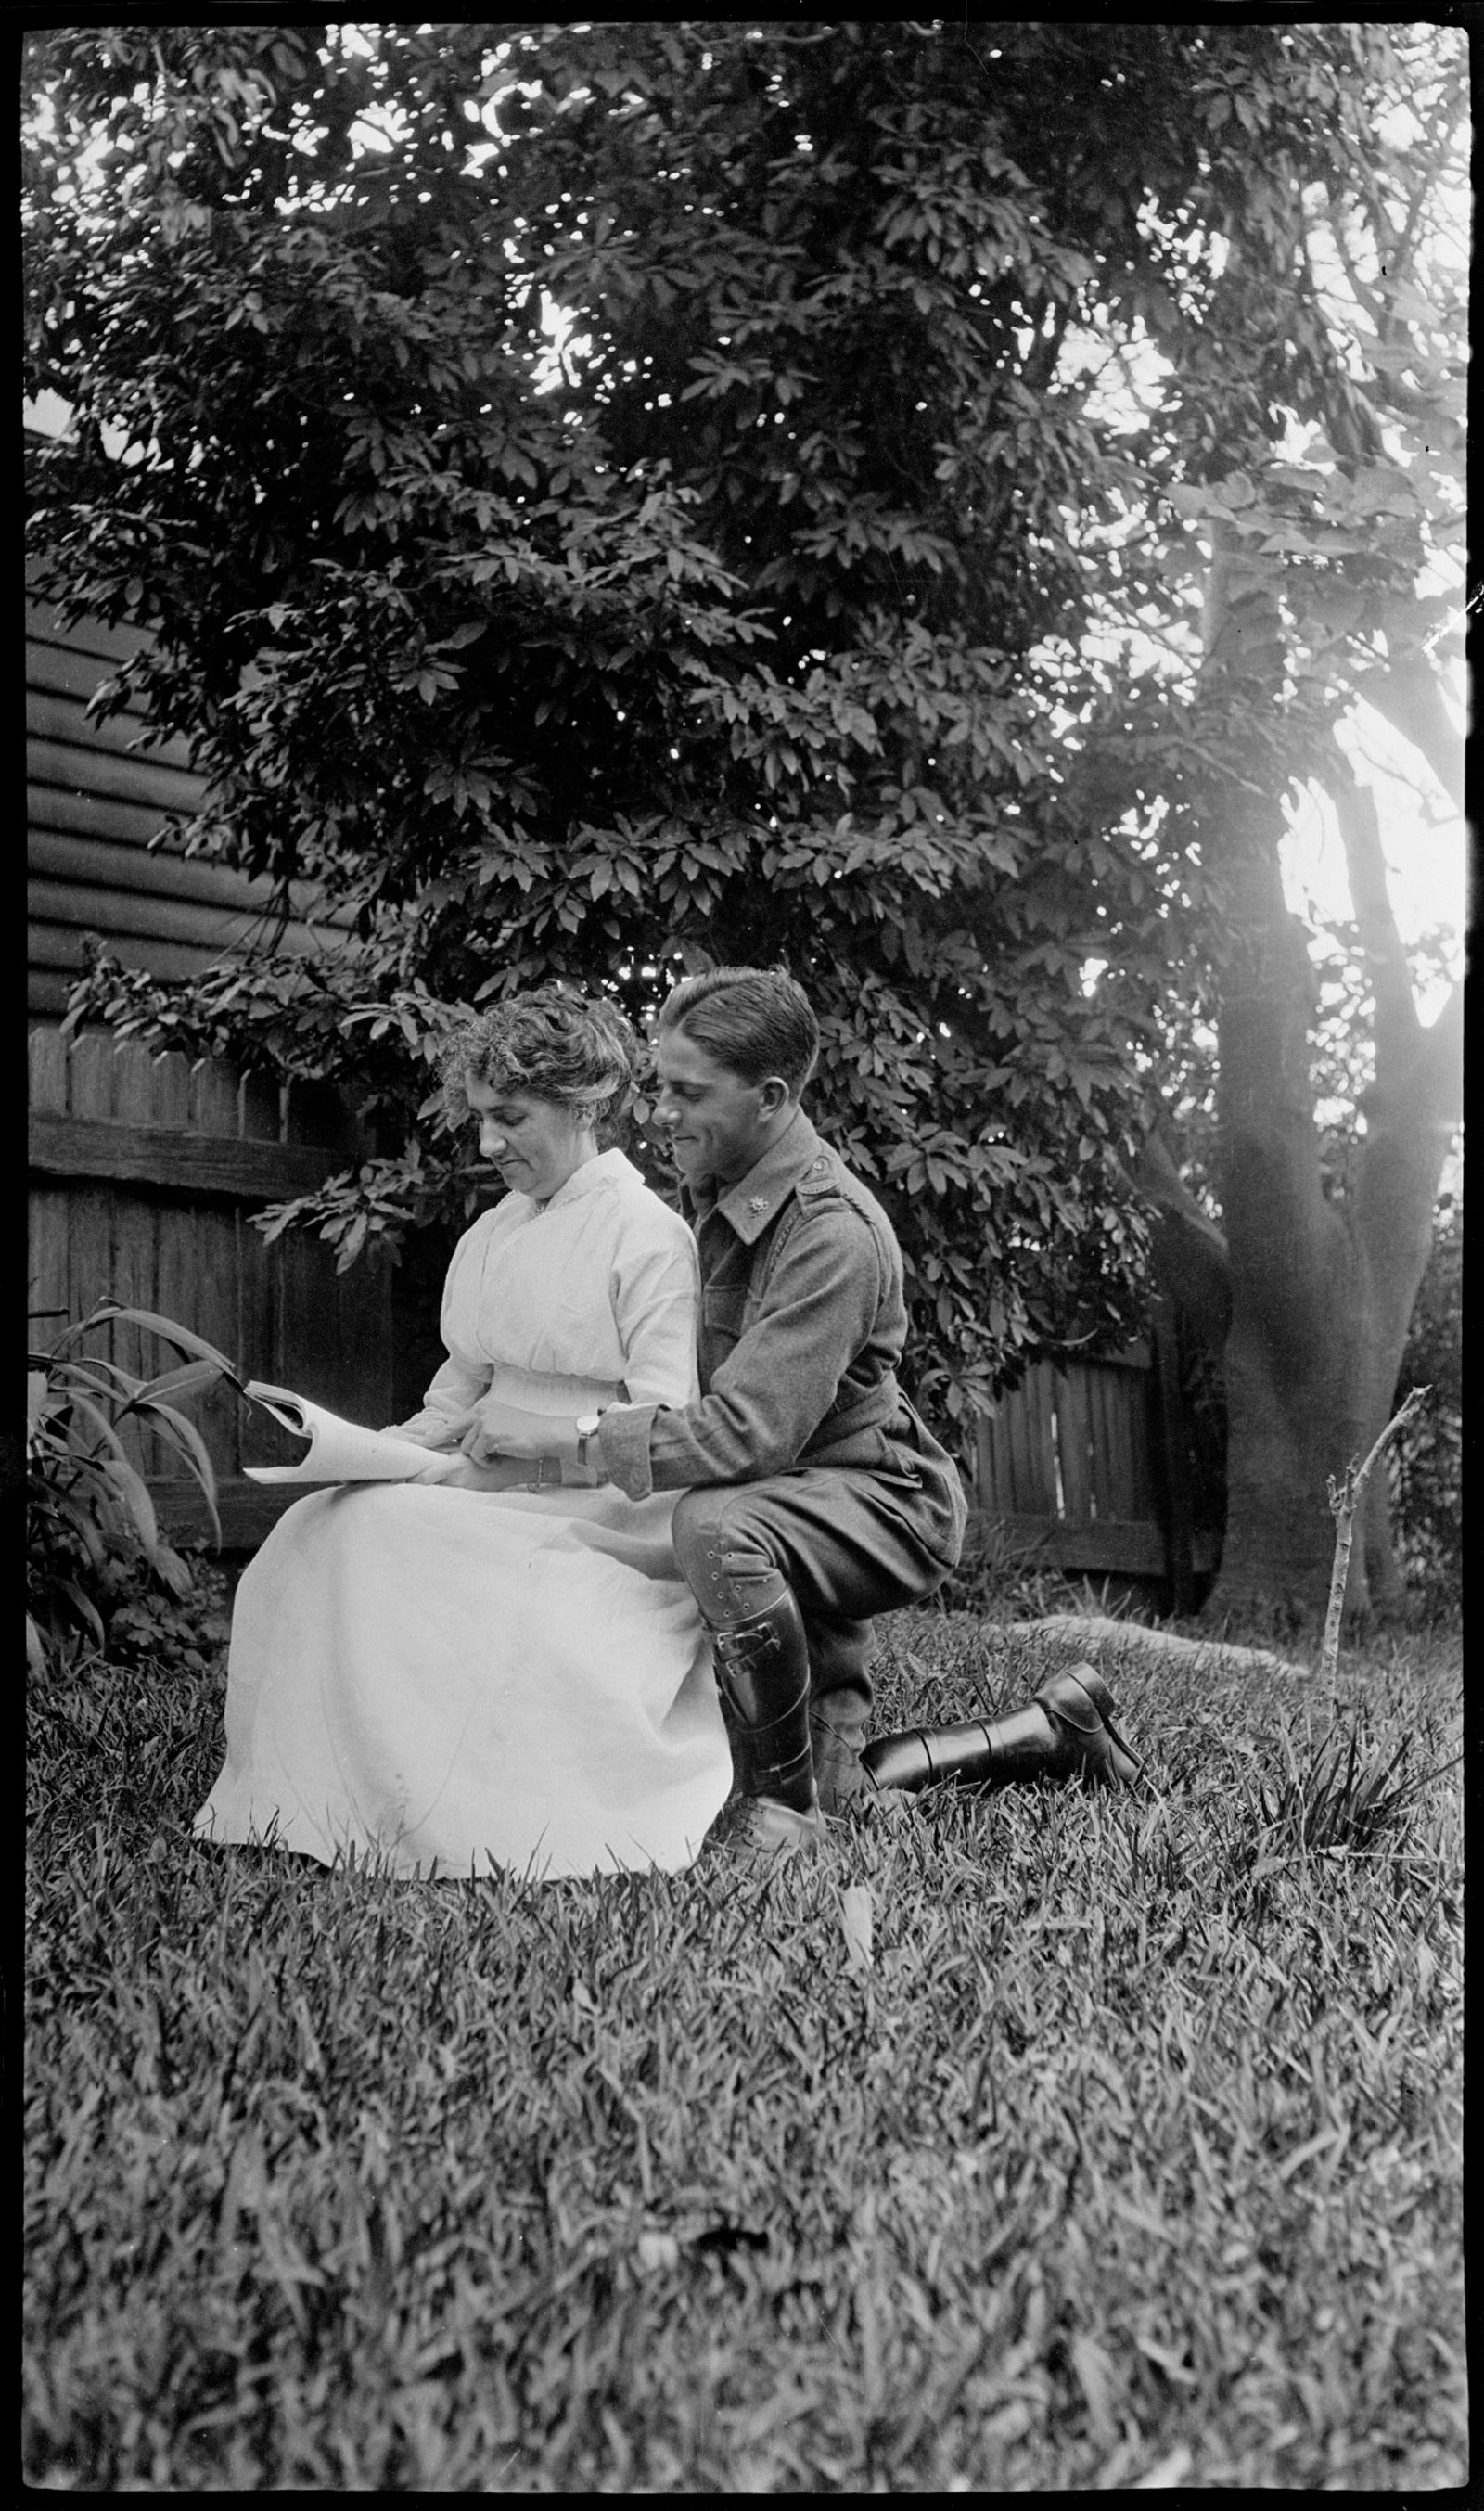 Robert Barnet with his mother Jessie, photograph taken by Robert Barnet, March 1916